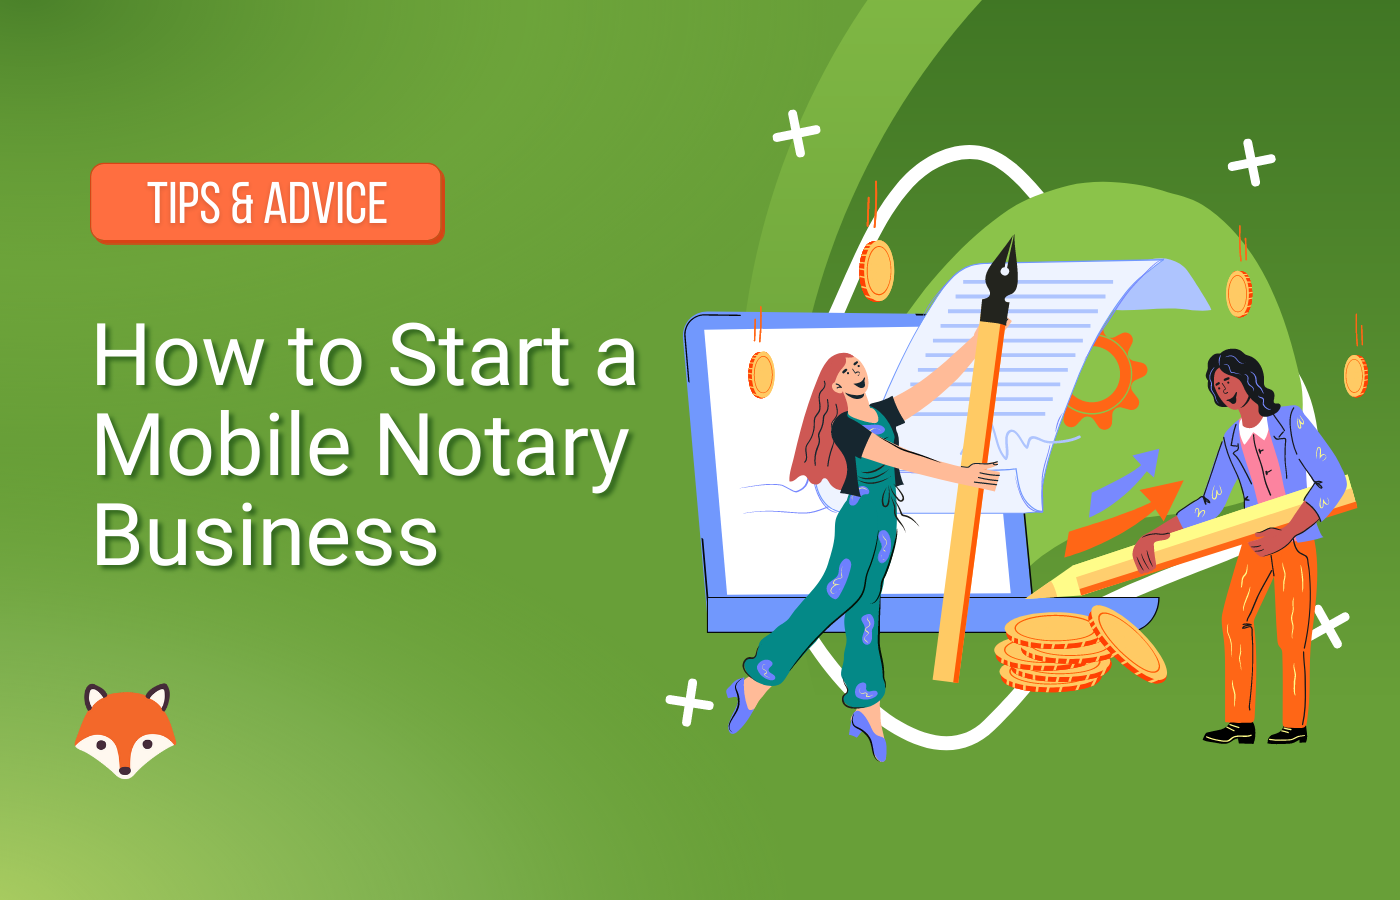 mobile notary business plan